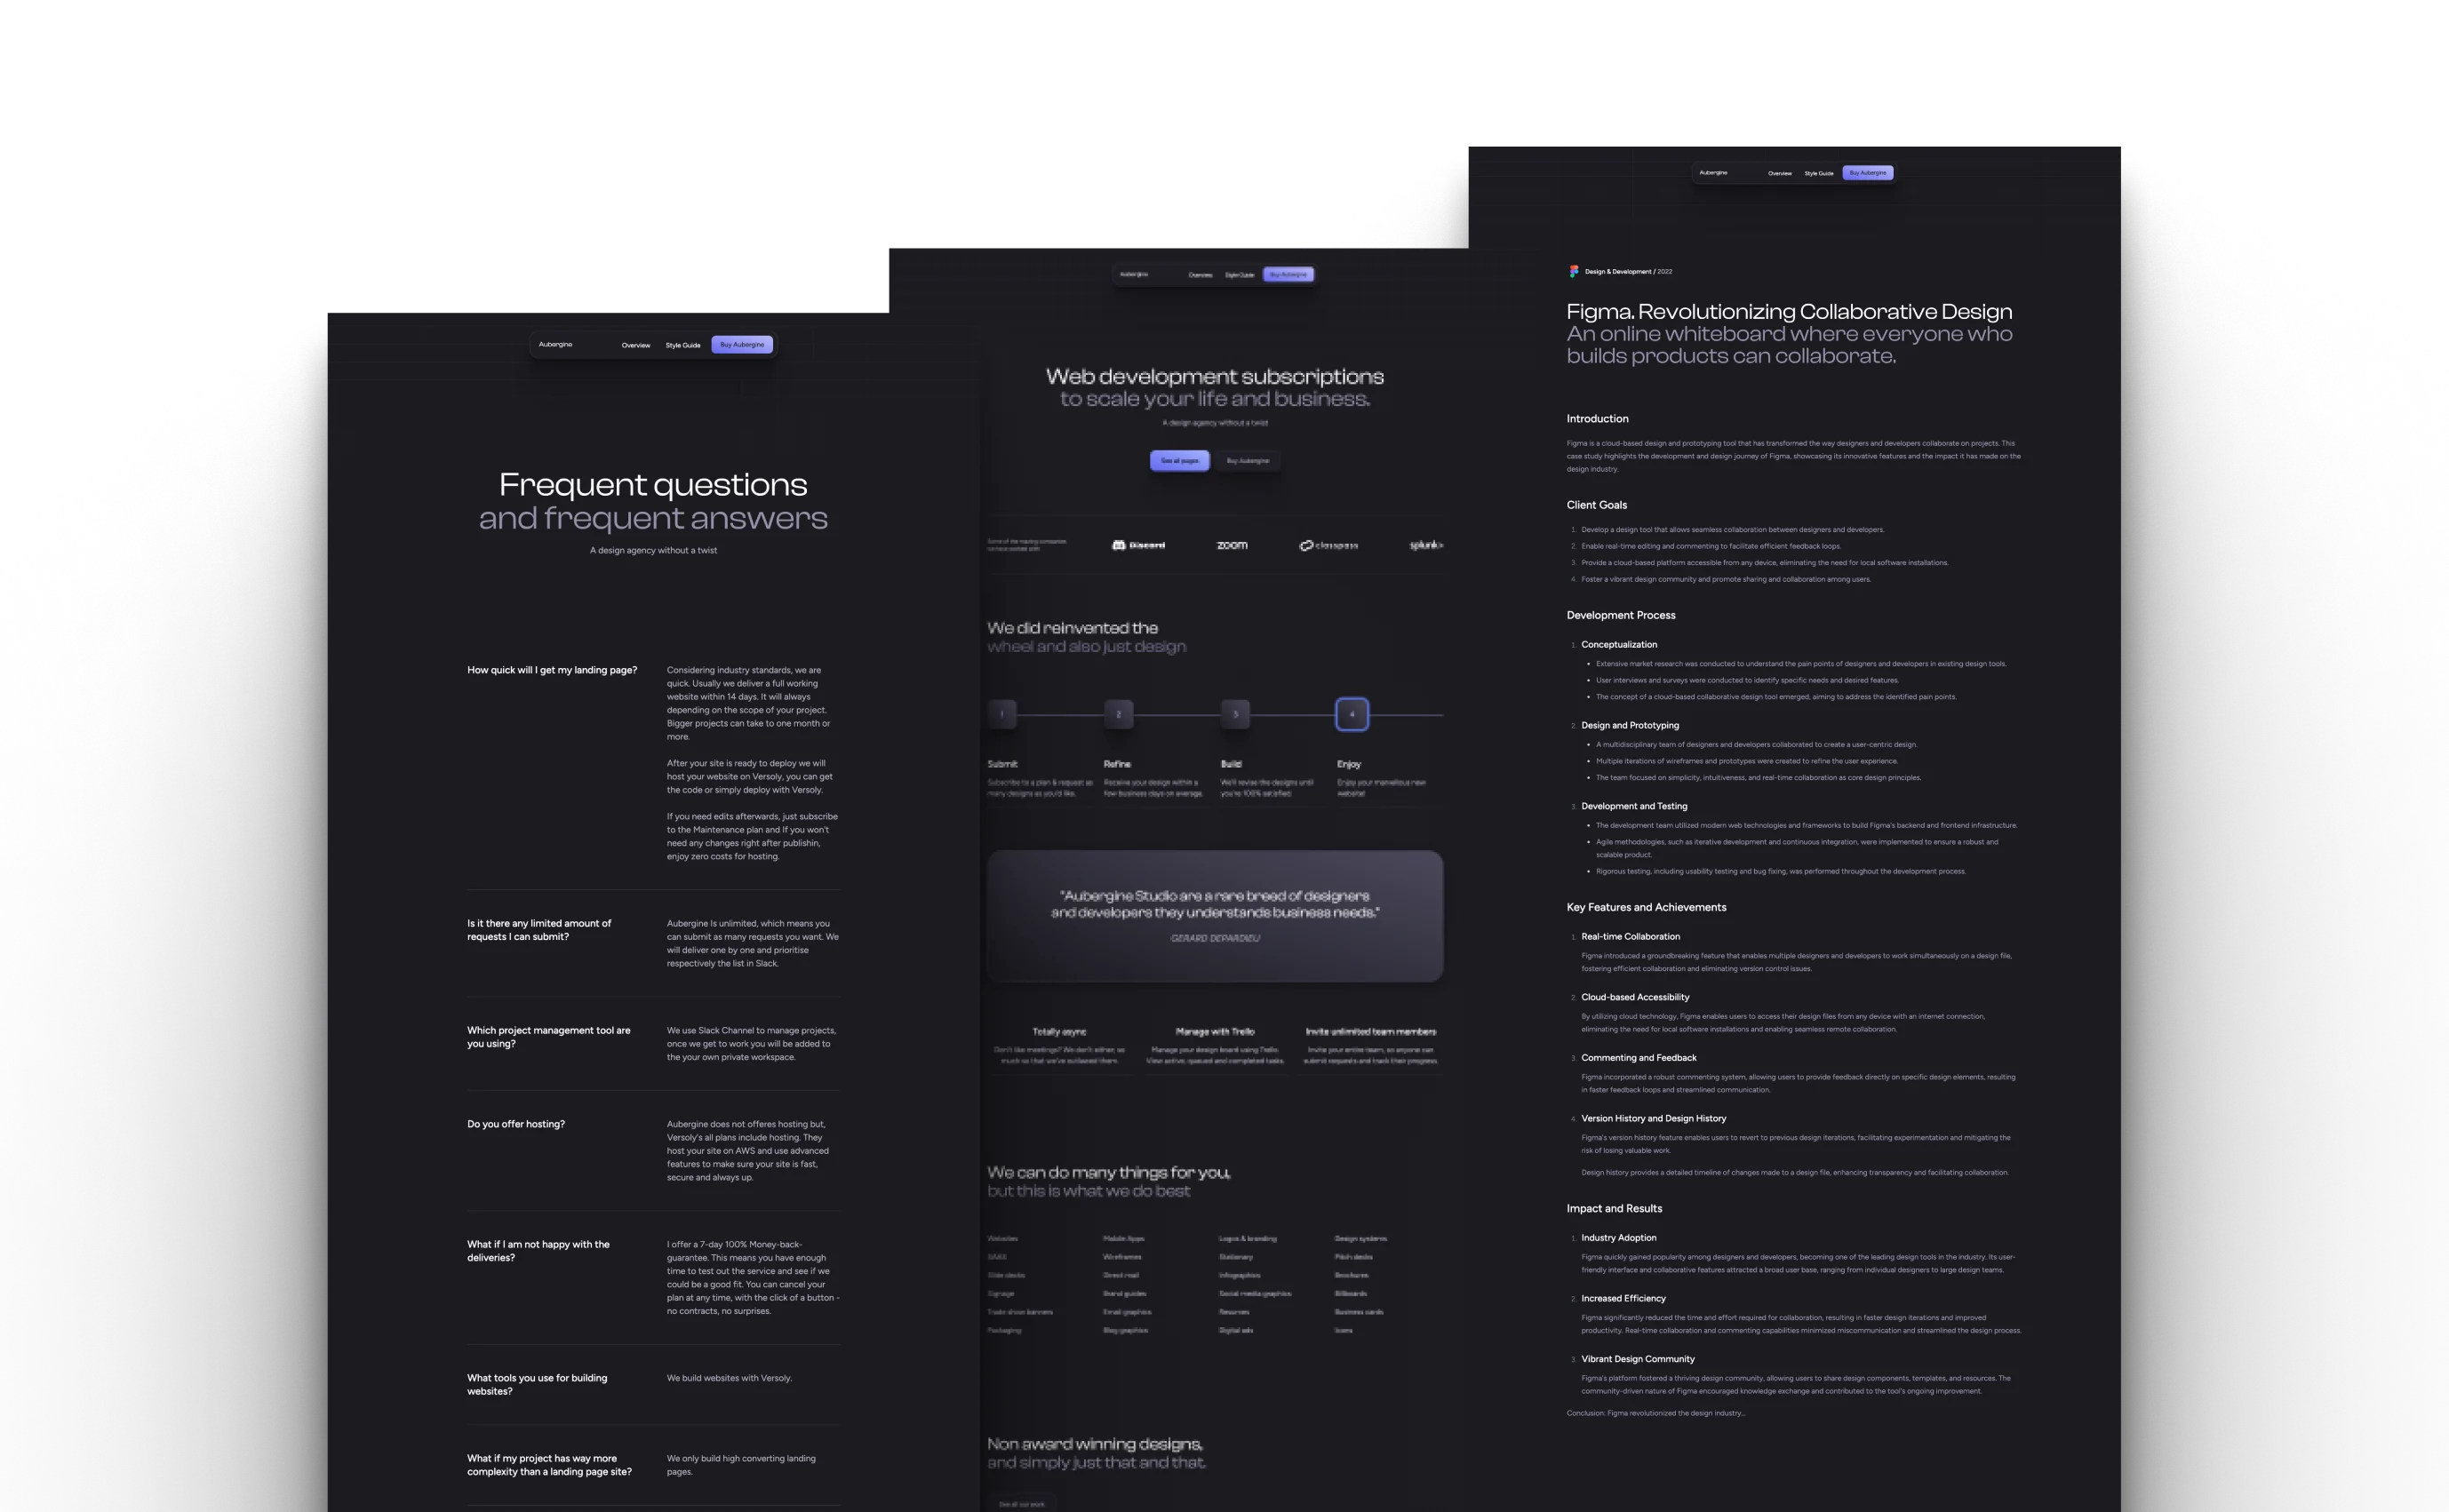 Aubergine theme featuring a FAQ section and project details with a sophisticated dark design and purple highlights. The page includes a variety of text-heavy content areas for explaining services, outlining processes, and showcasing testimonials, all designed to provide comprehensive information to users.